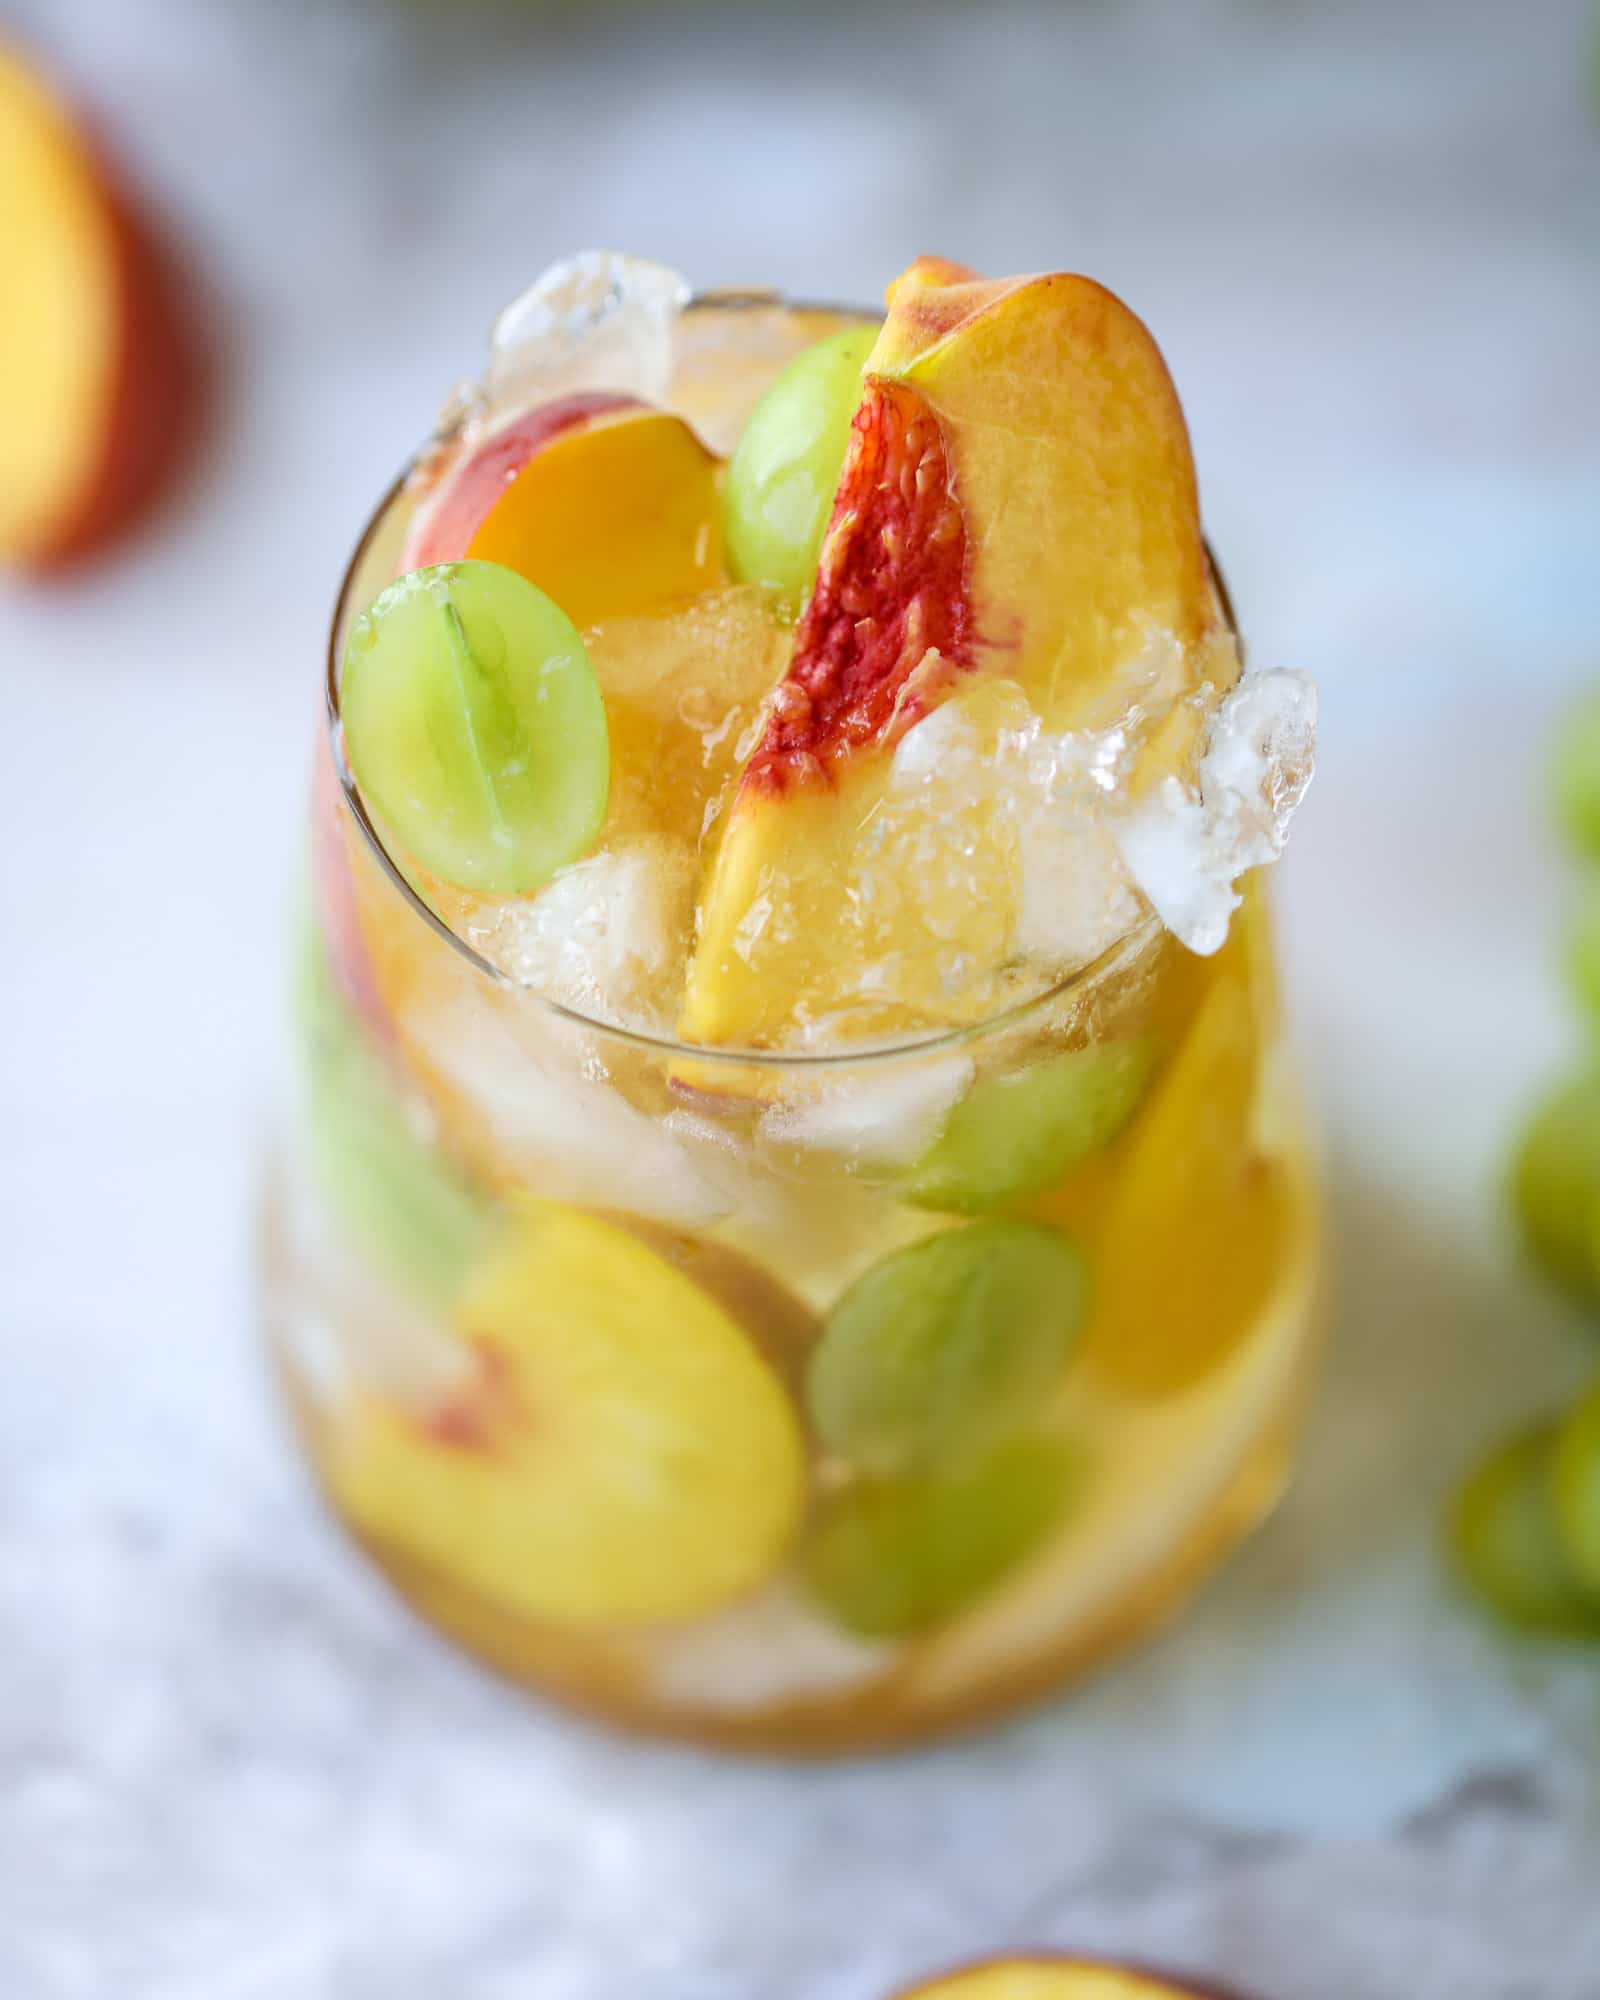 This pinot grigio sangria is absolutely perfect for summer, complete with peach nectar, fresh and frozen peach slices, brandy and bubbles! Frozen green grapes add some chill without watering down the drink. It's perfect! I howsweeteats.com #pinot #grigio #peach #sangria #cocktails #punch #summer #wine